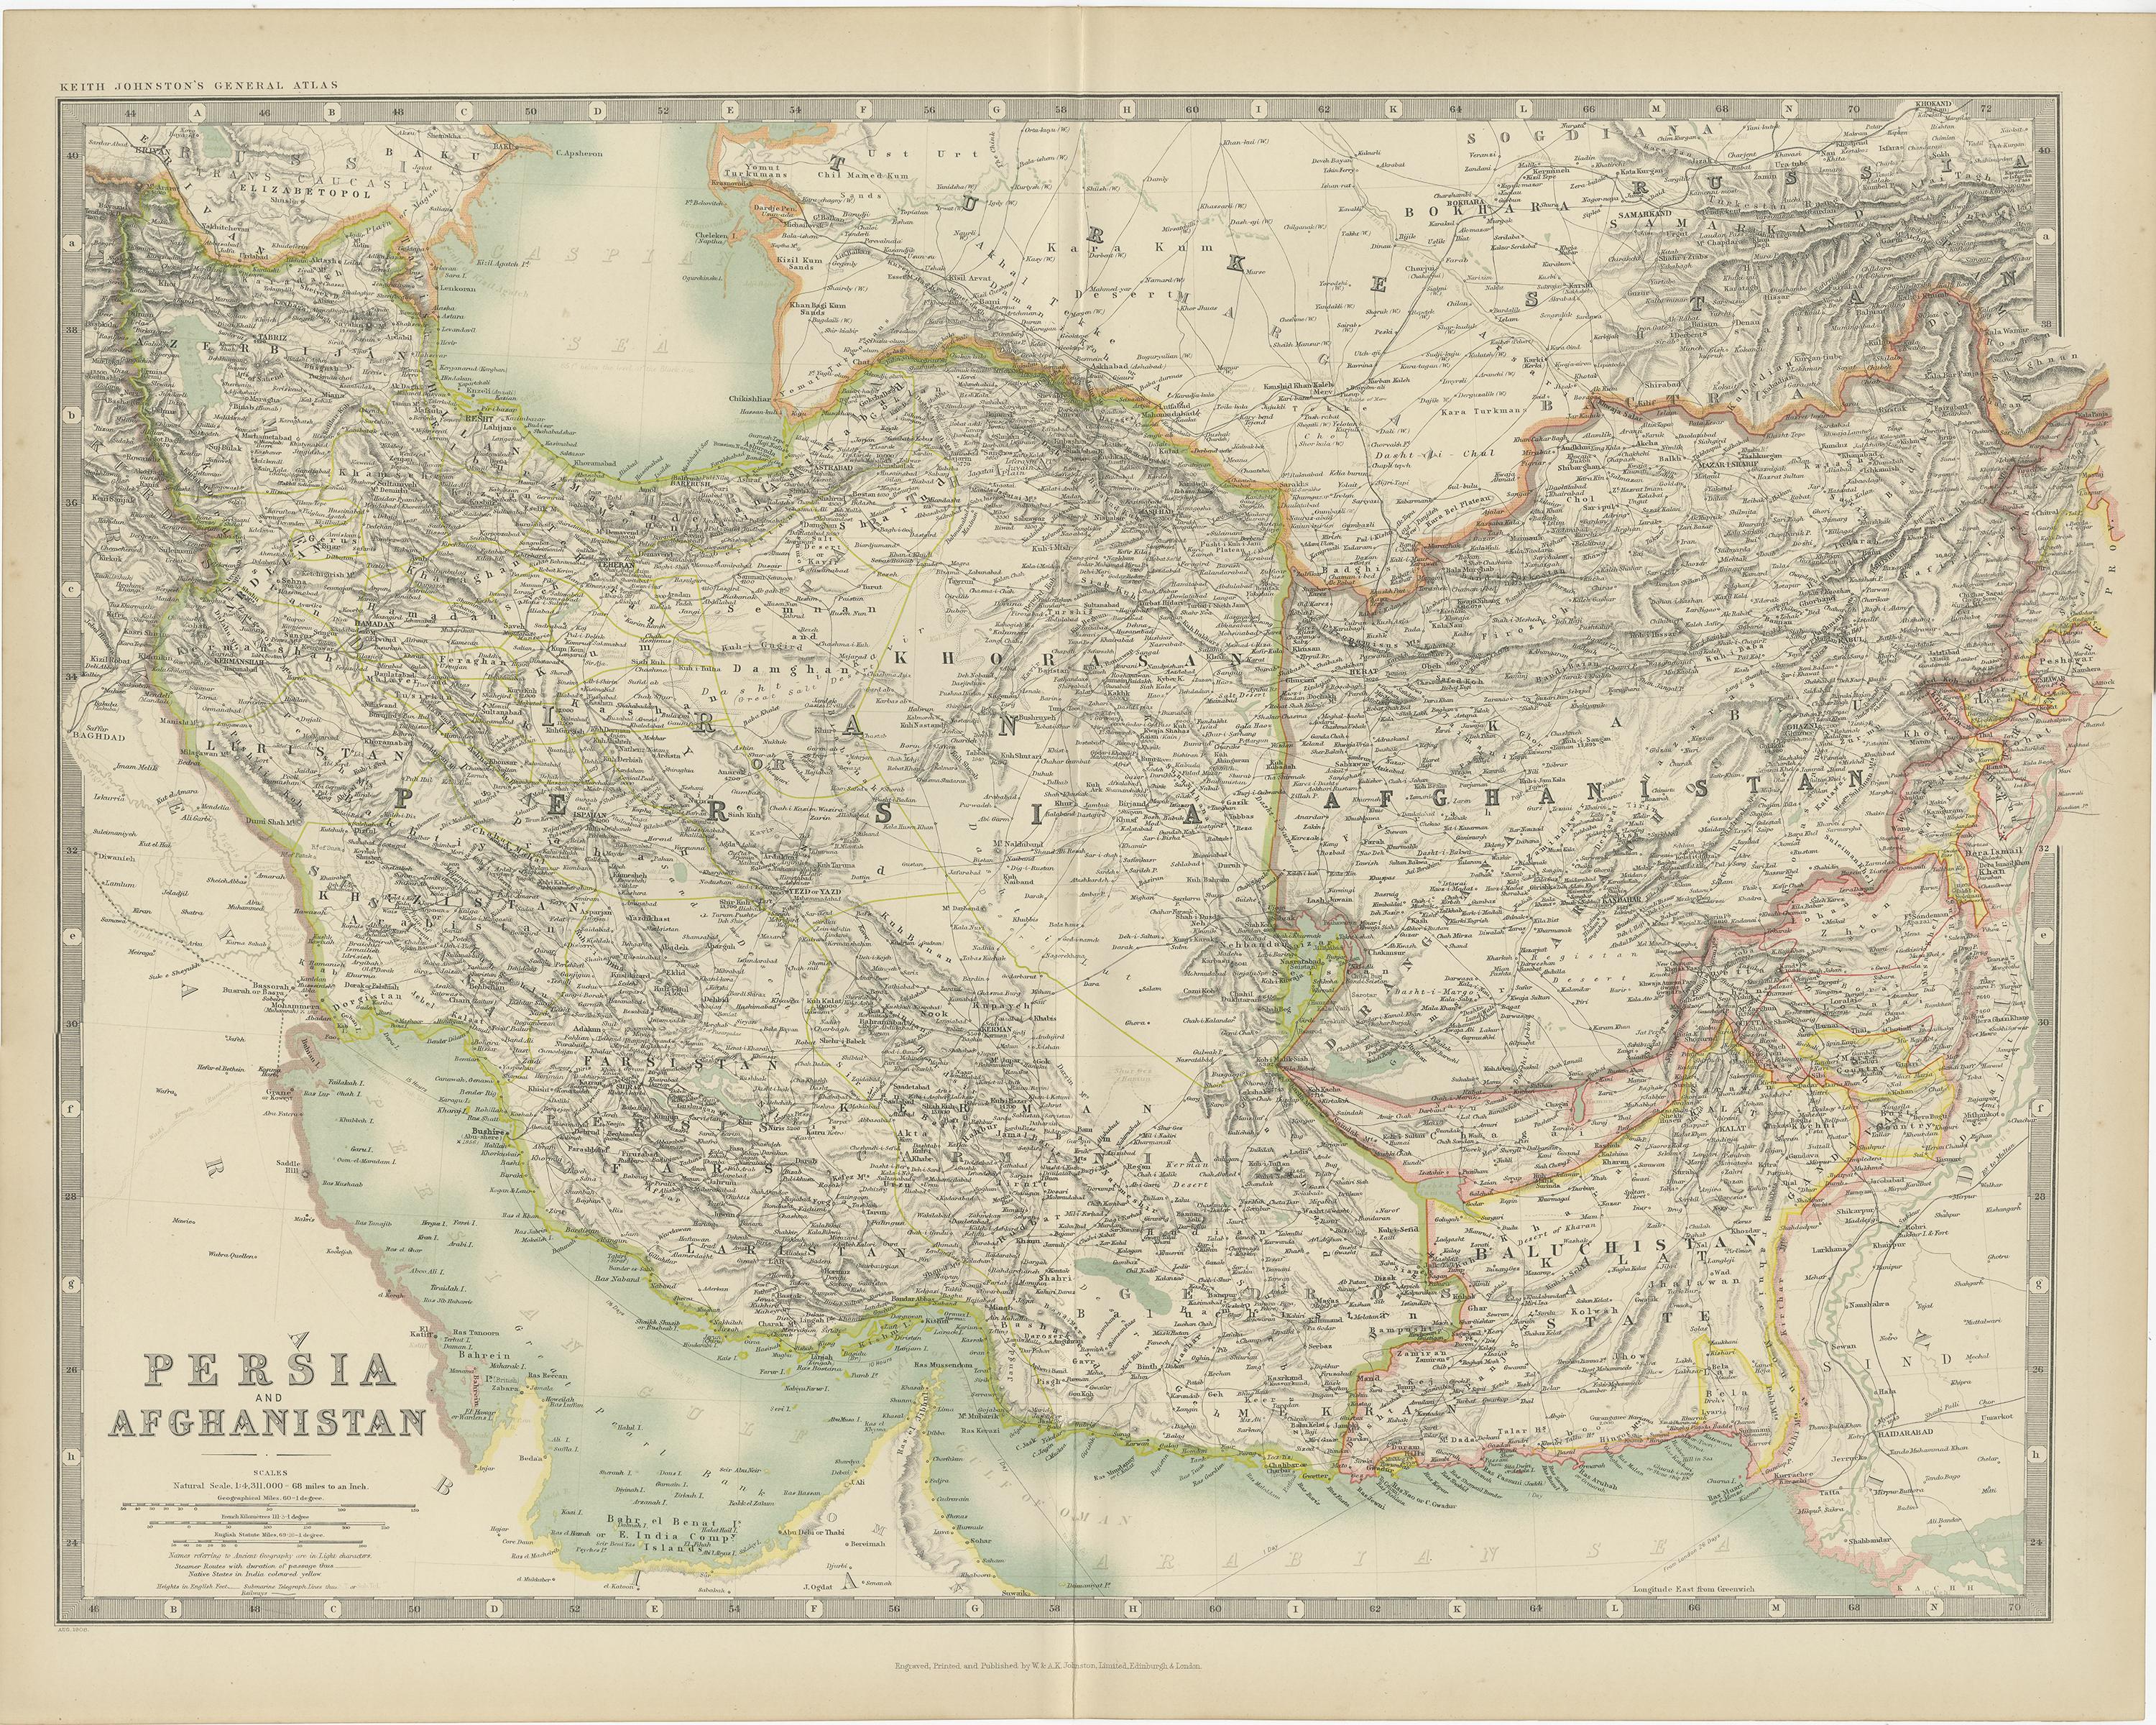 Antique map titled 'Persia and Afghanistan'. Original antique map of Persia and Afghanistan. This map originates from the ‘Royal Atlas of Modern Geography’. Published by W. & A.K. Johnston, 1909.